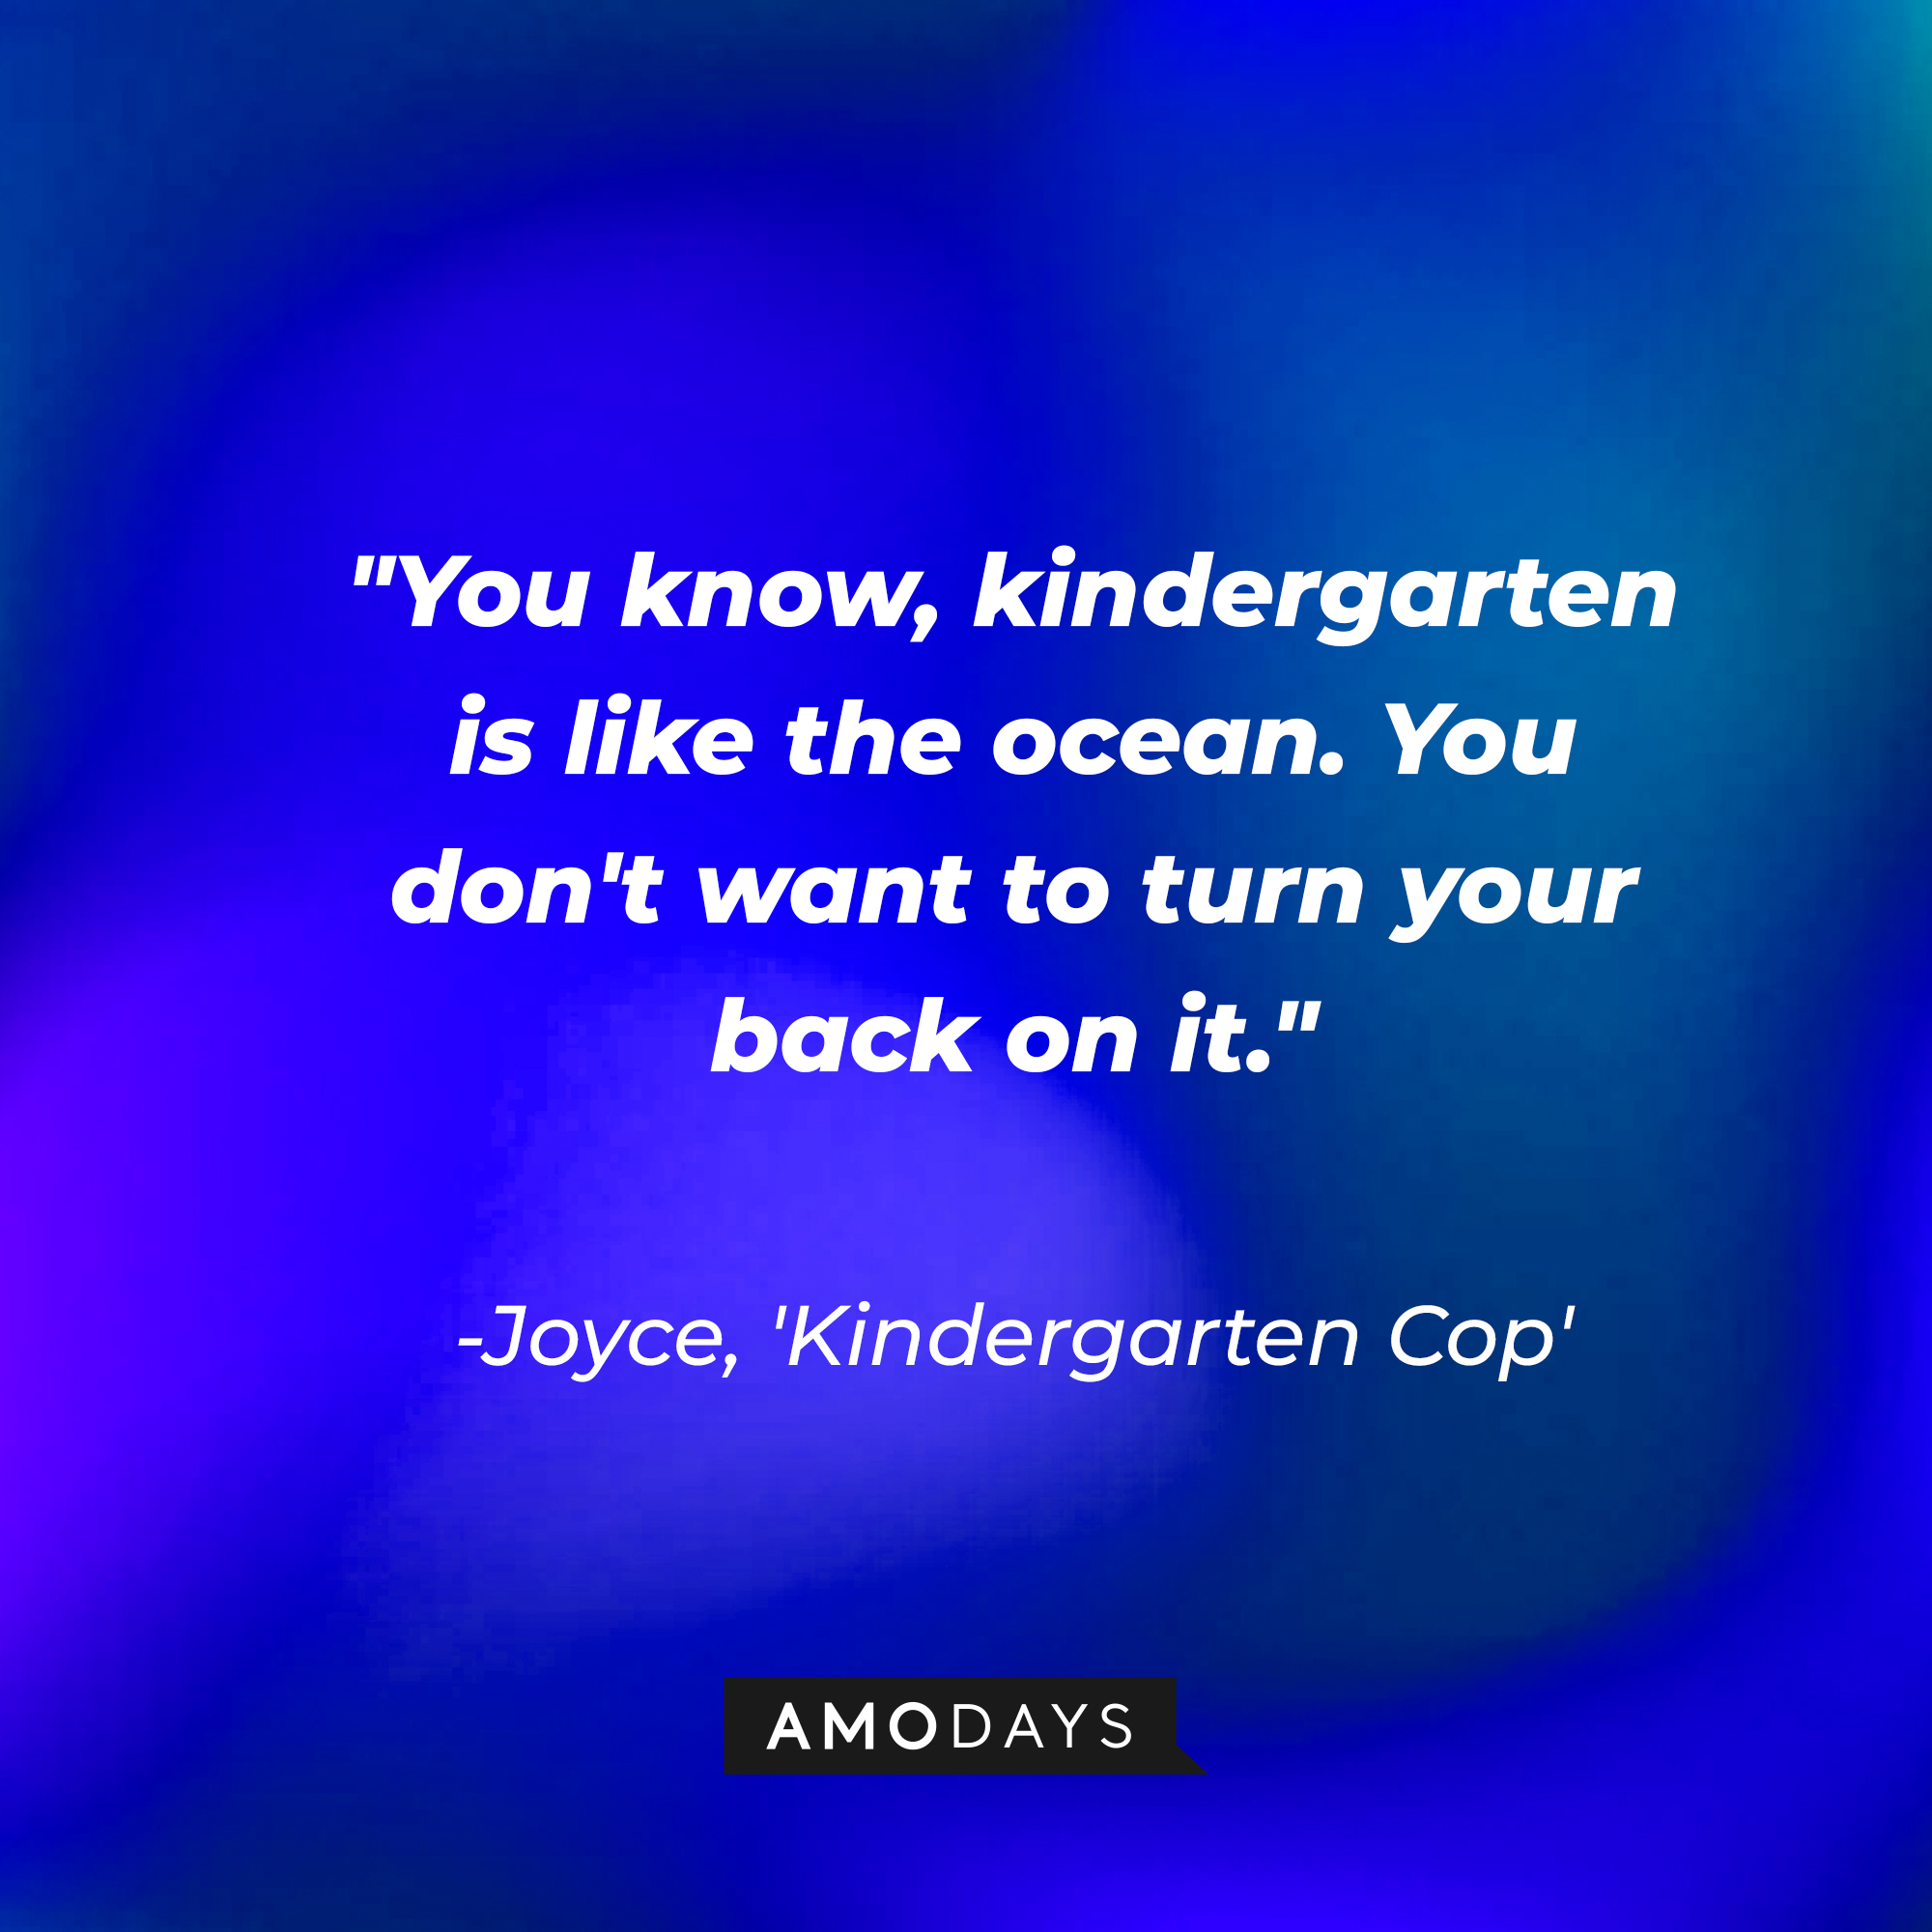 Joyce's quote in "Kindergarten Cop:" "You know, kindergarten is like the ocean. You don't want to turn your back on it.”  | Source: AmoDays